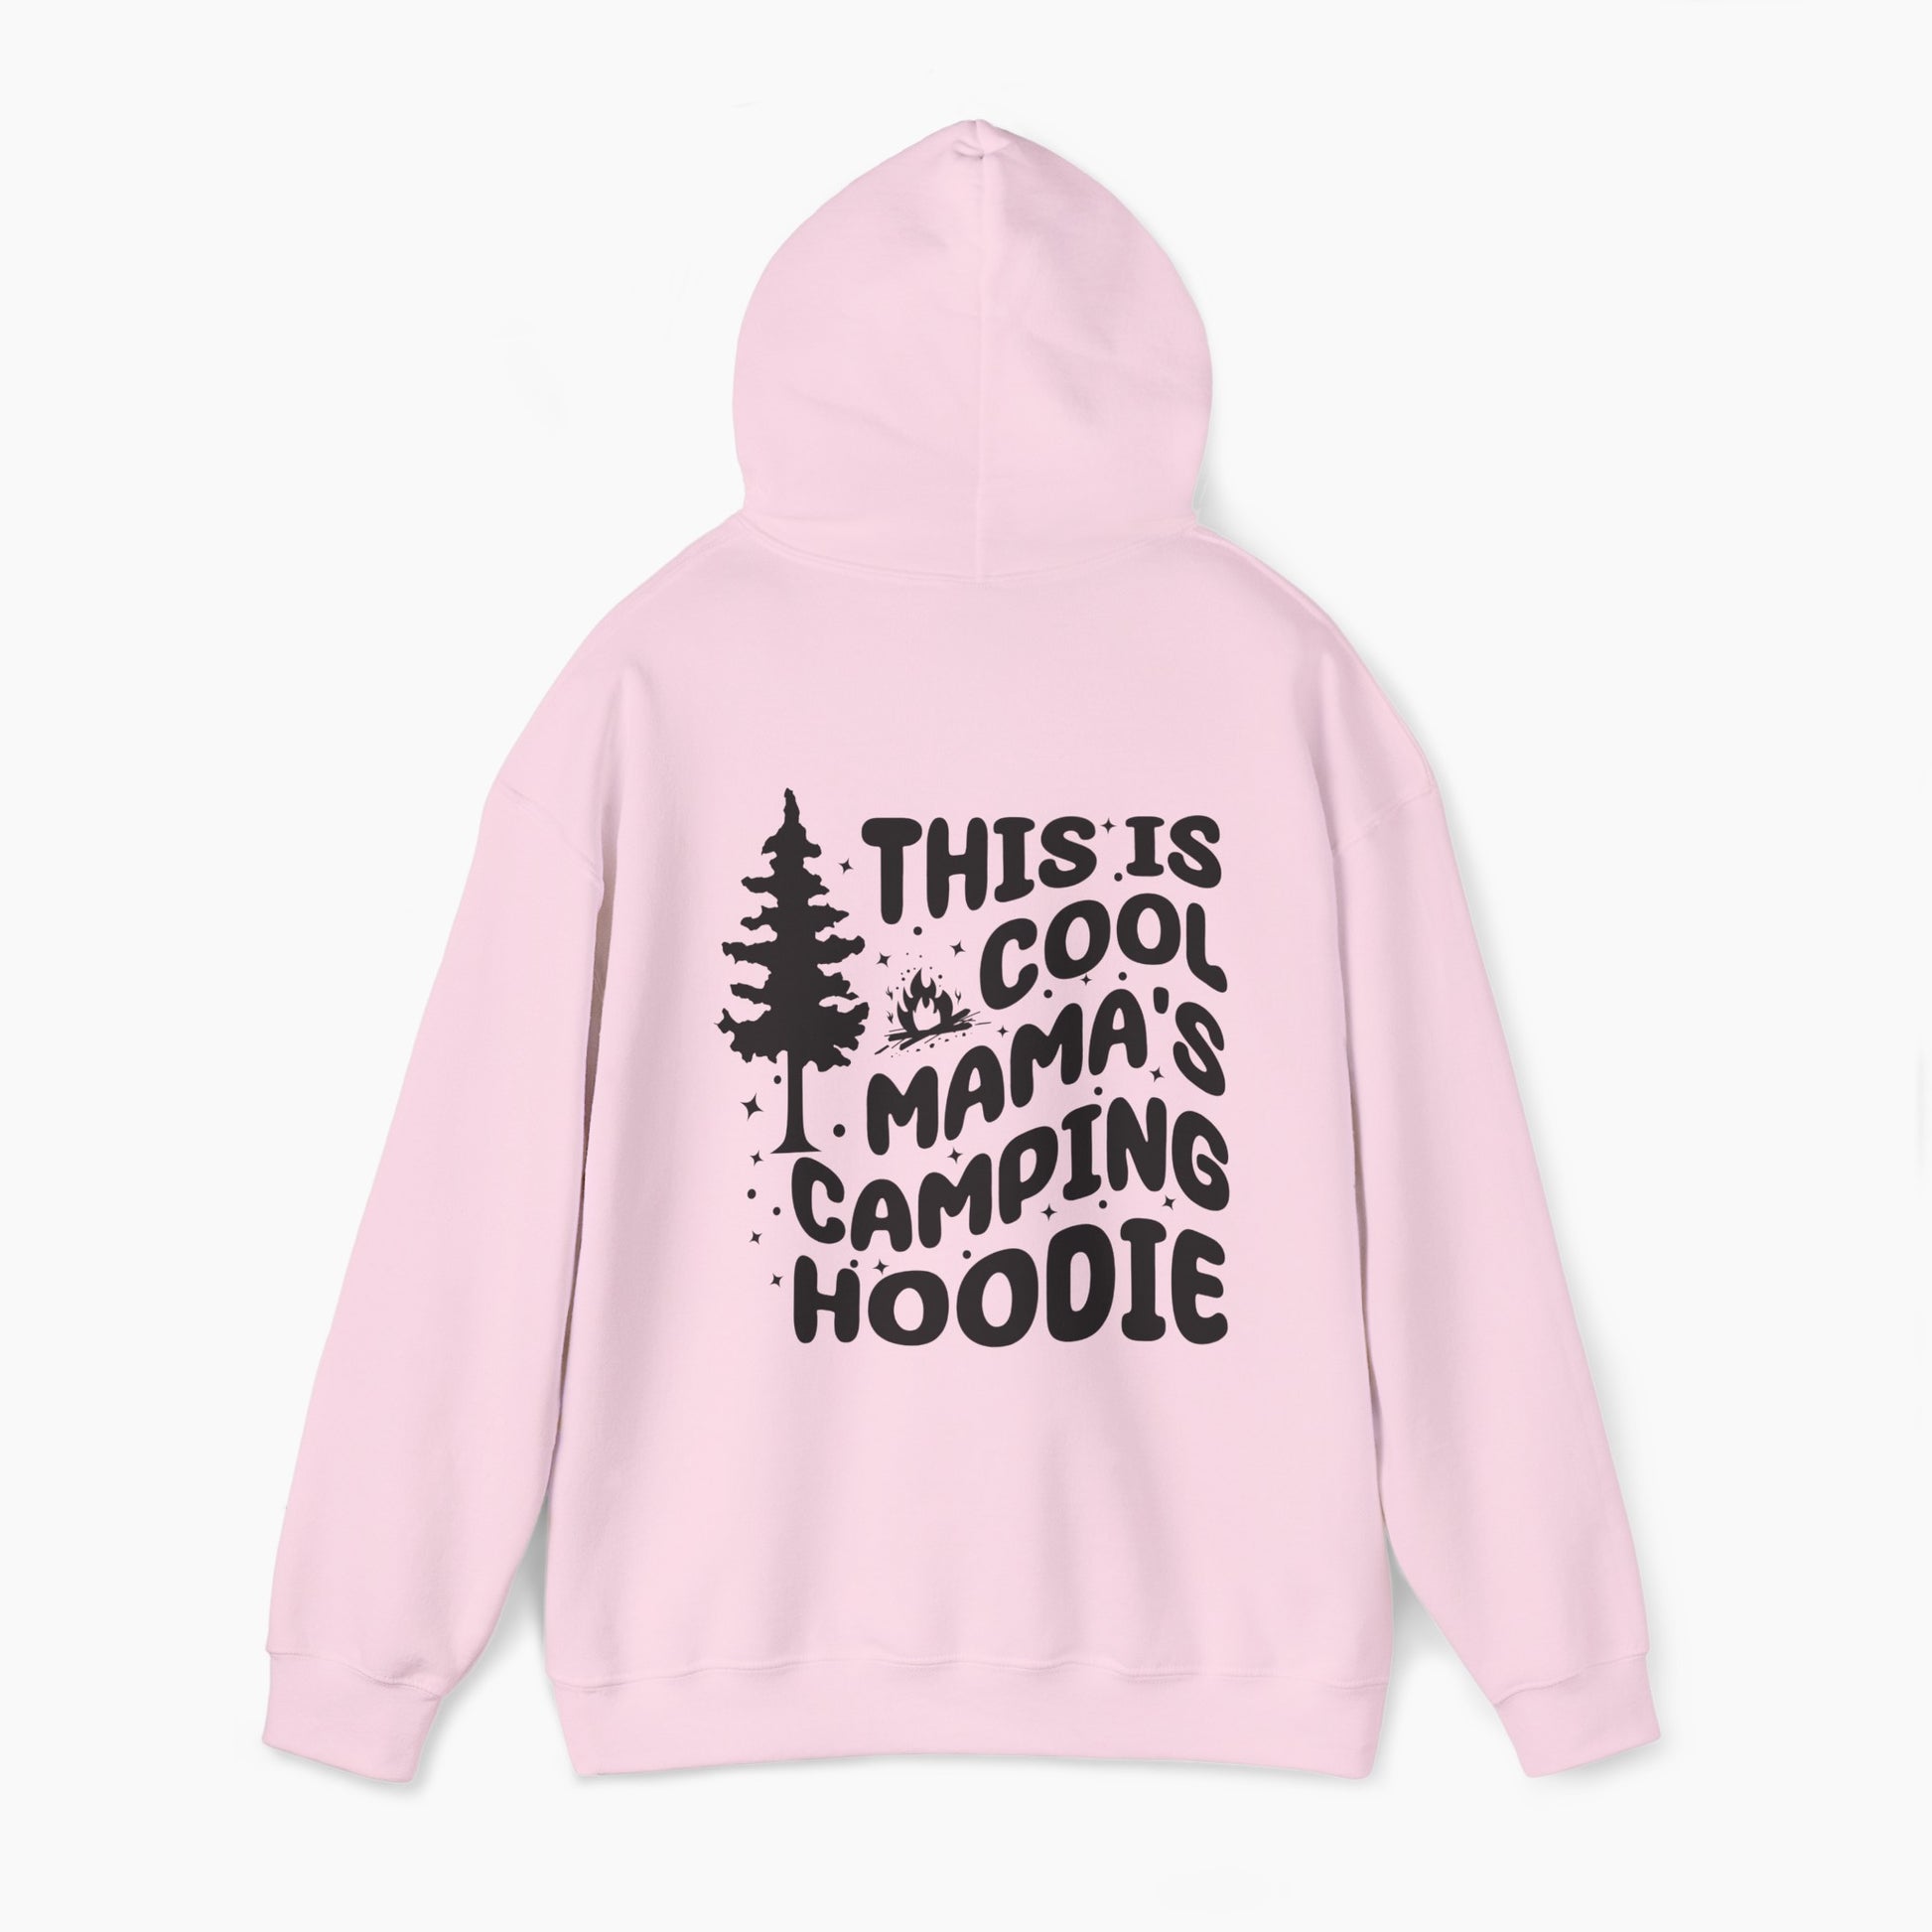 Light pink hoodie with the text 'This is cool mama's camping hoodie' on the back, featuring a tree and stars design on a plain background.